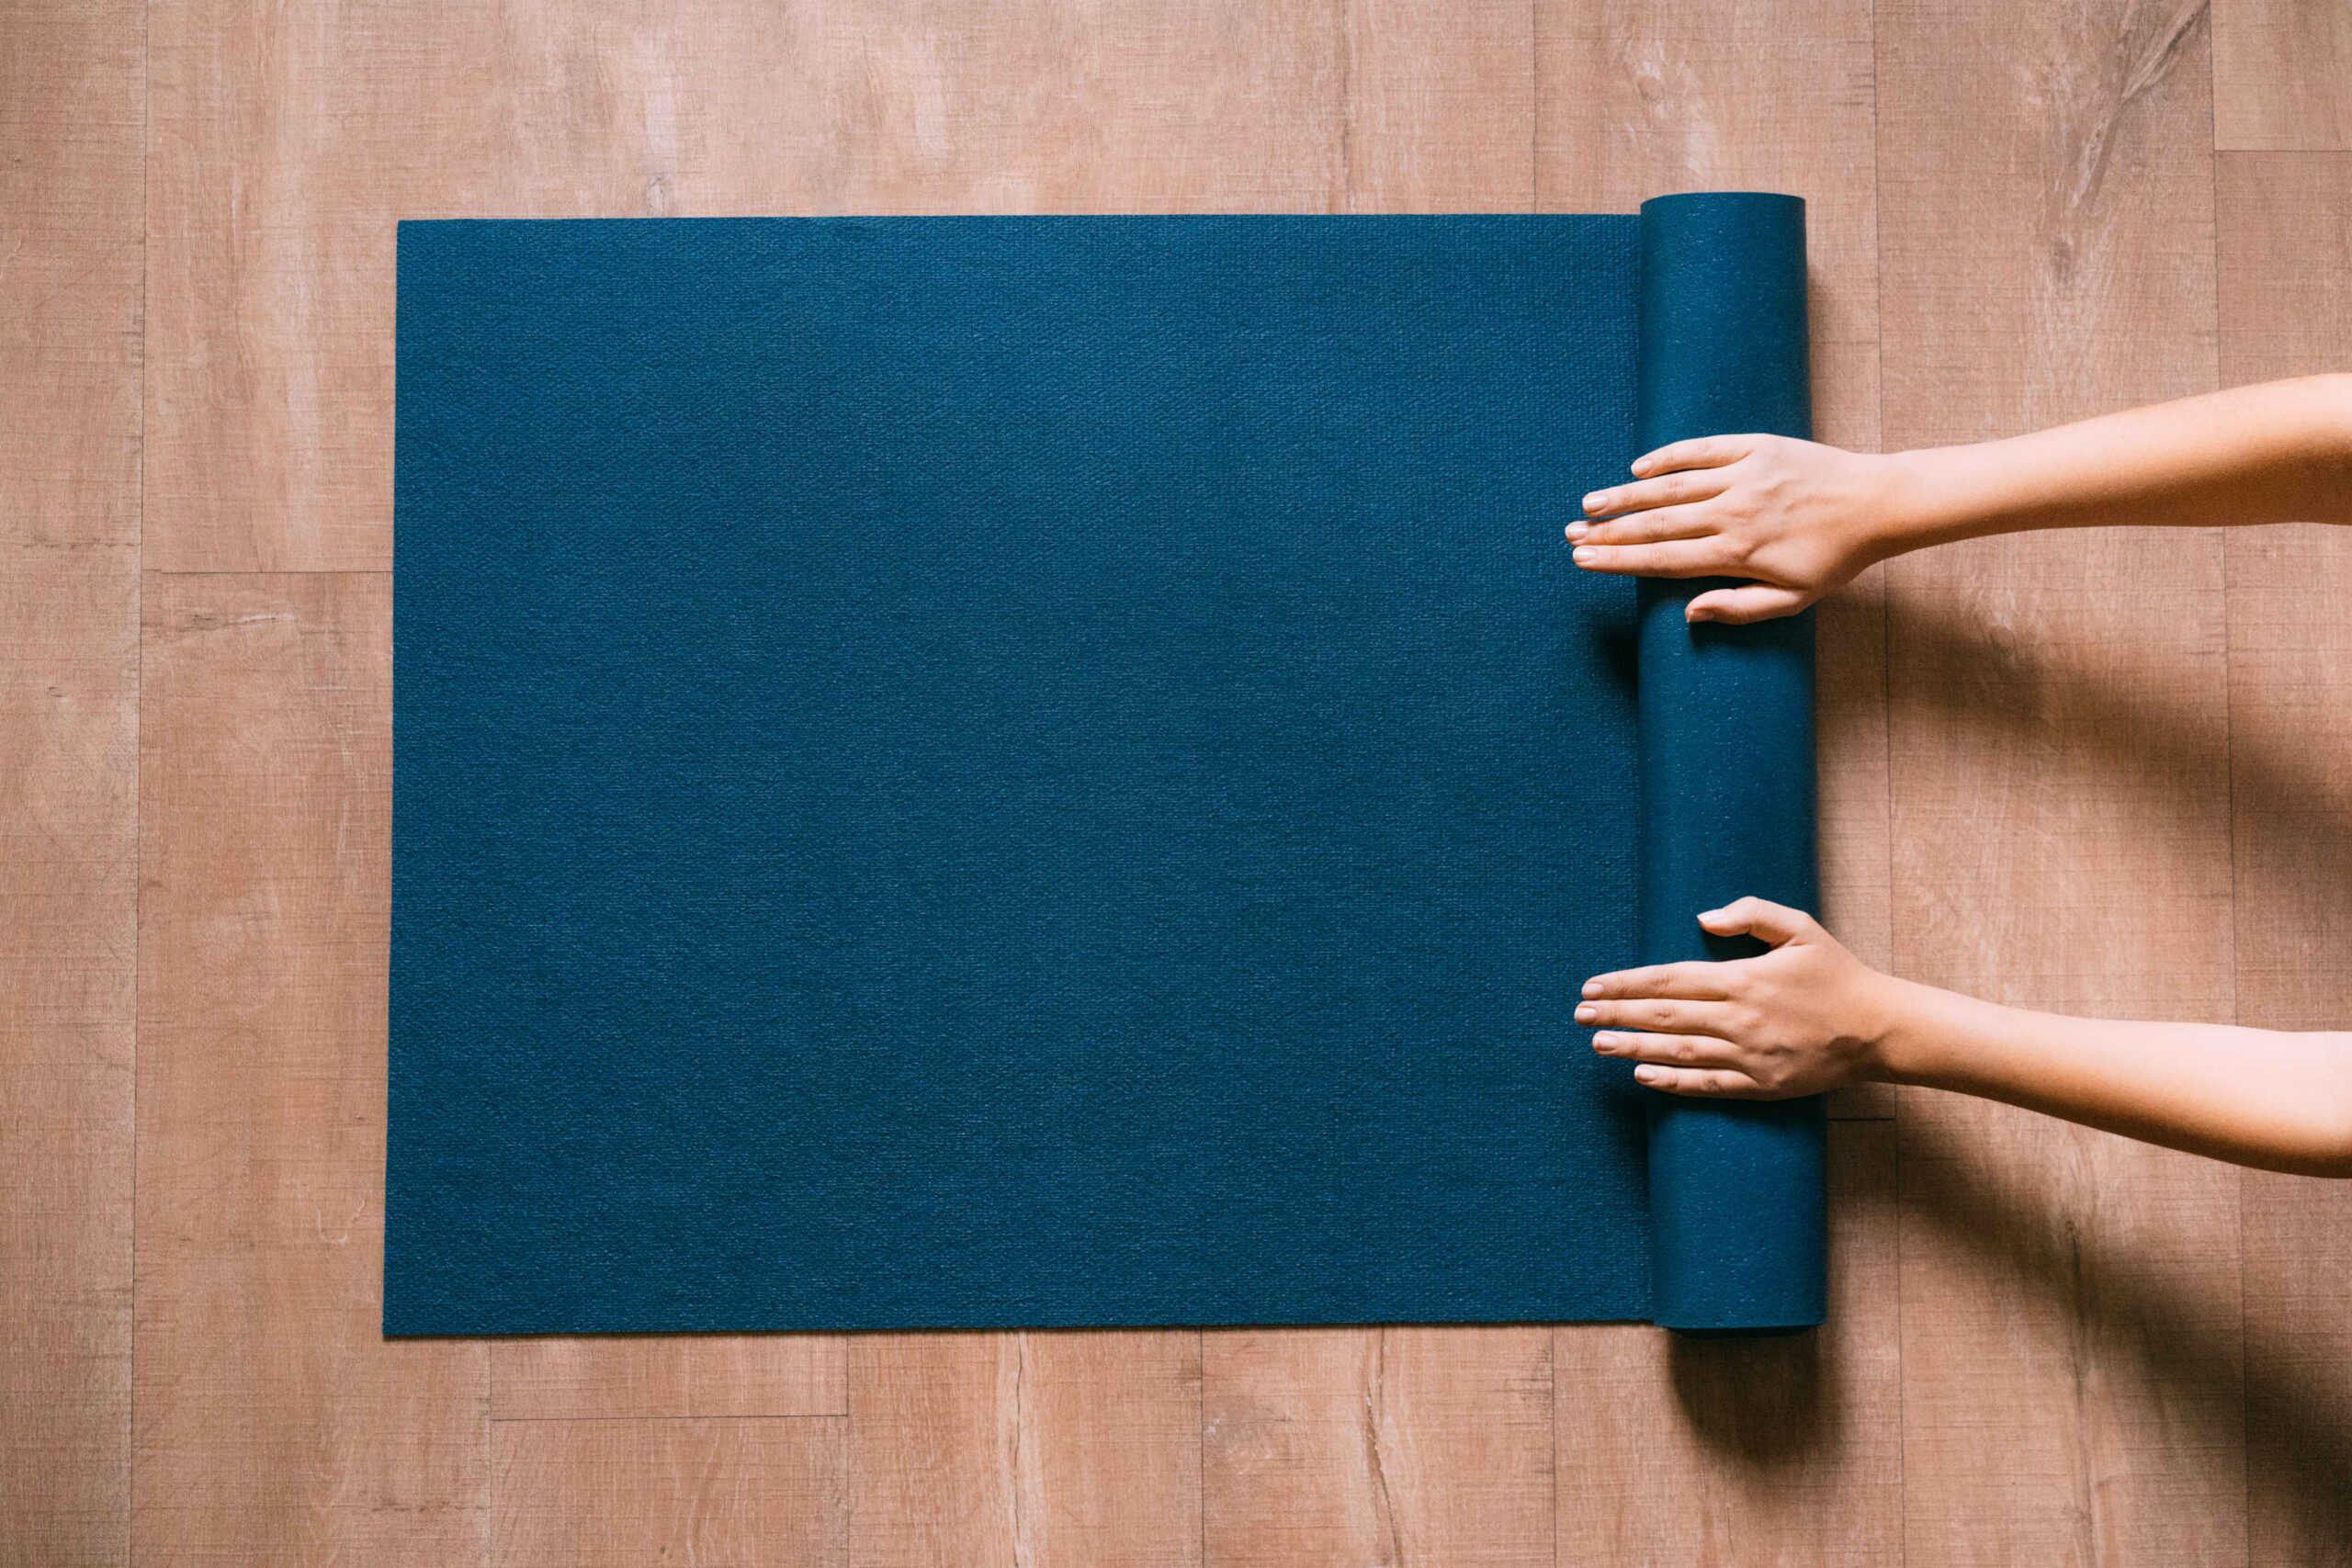 woman rolling up a blue yoga mat on a wood floor